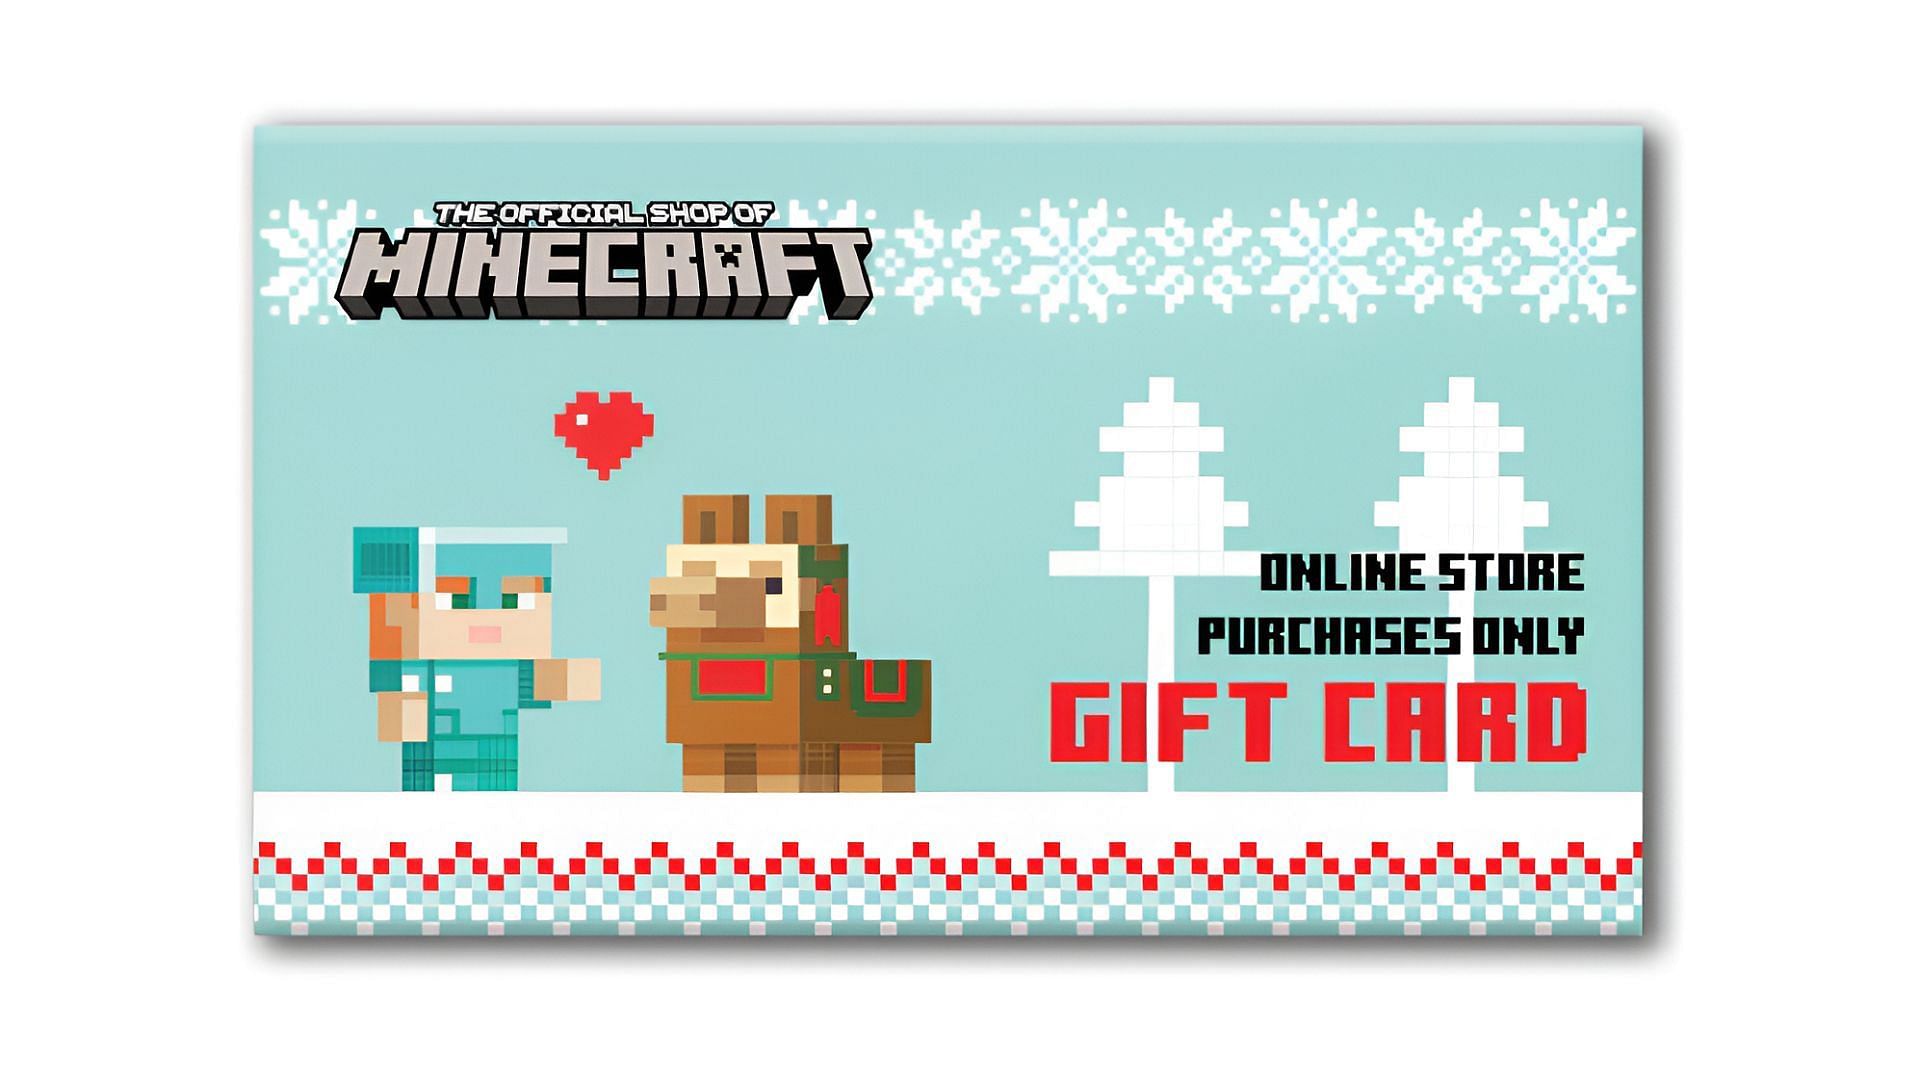 Online shop gift cards are handled a little differently compared to their counterparts (Image via Mojang)